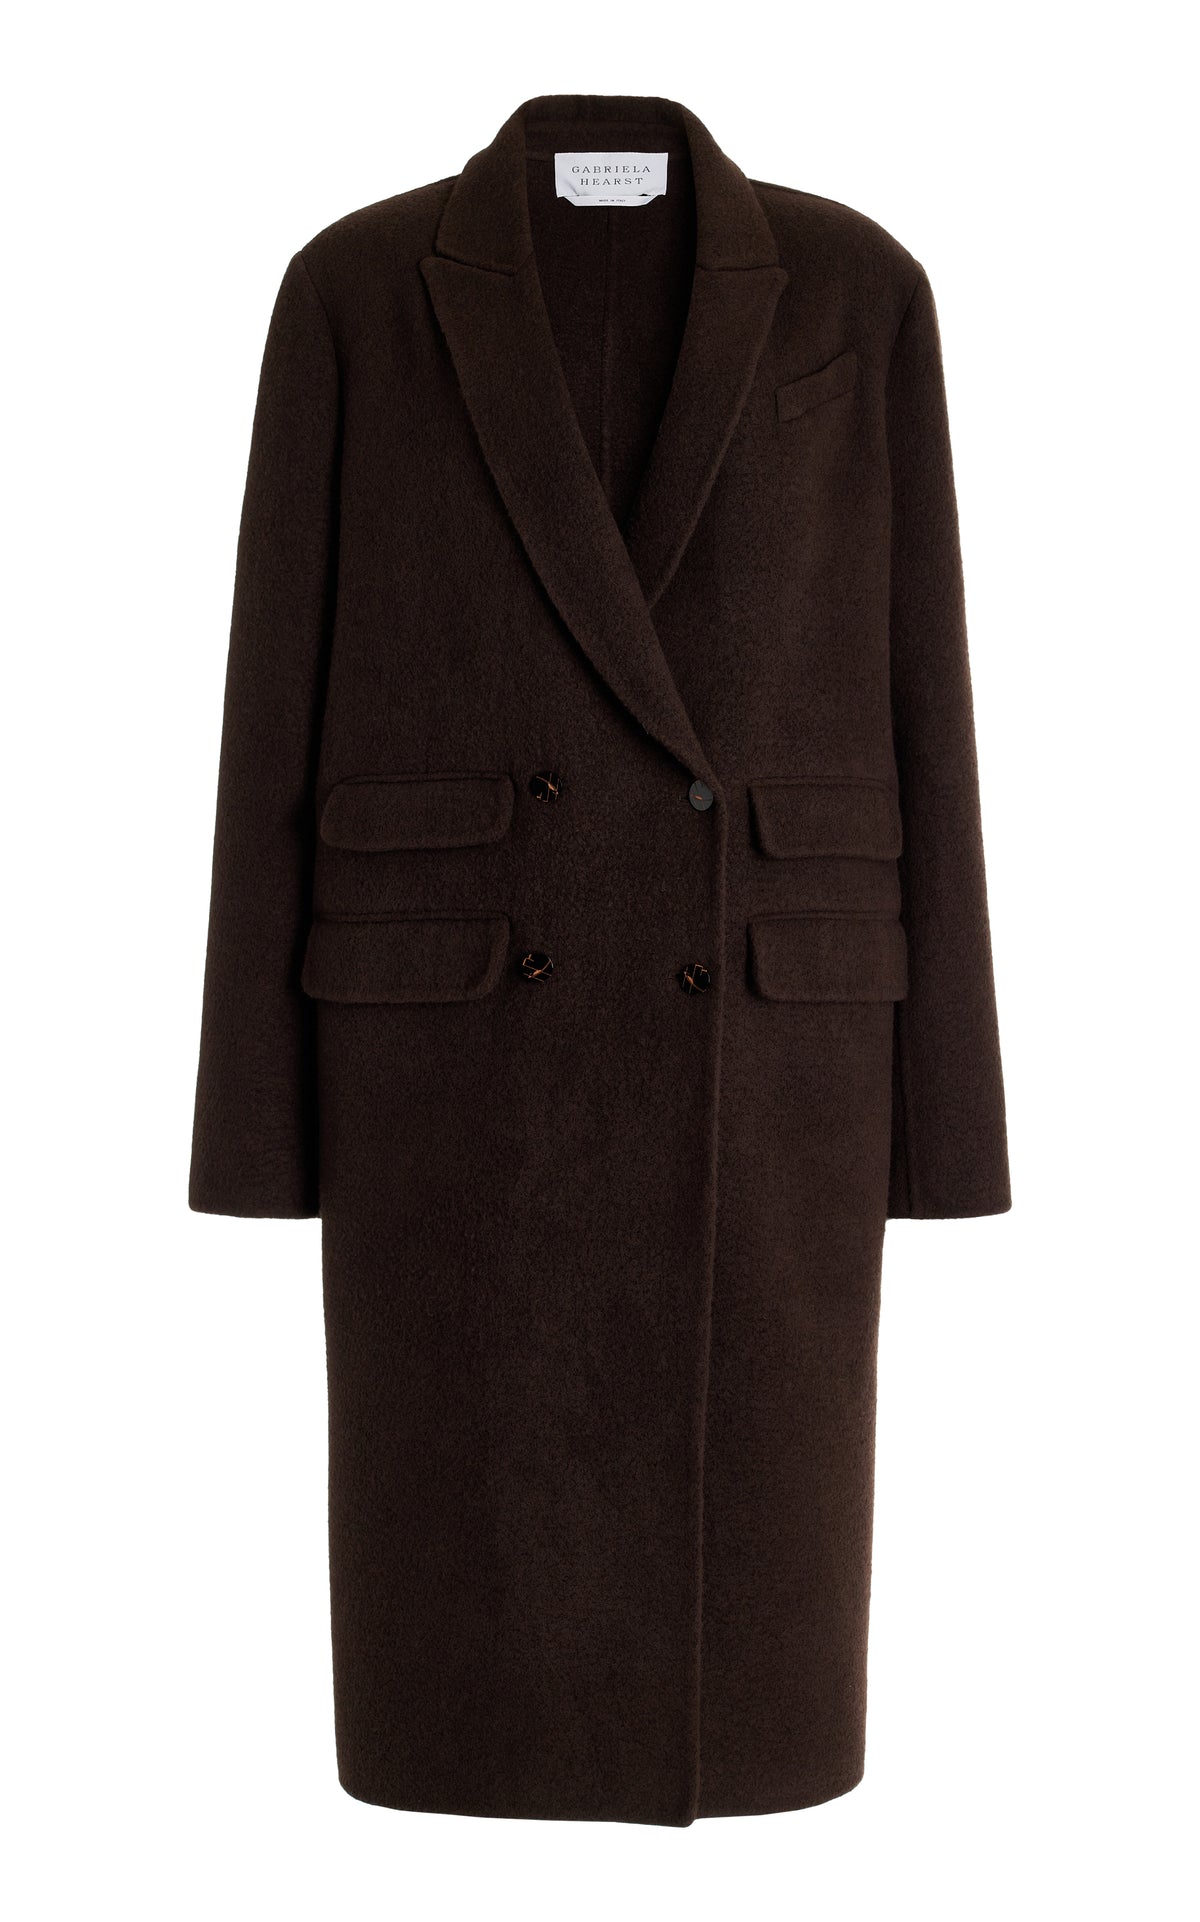 Reed Coat in Chocolate Recycled Cashmere Felt